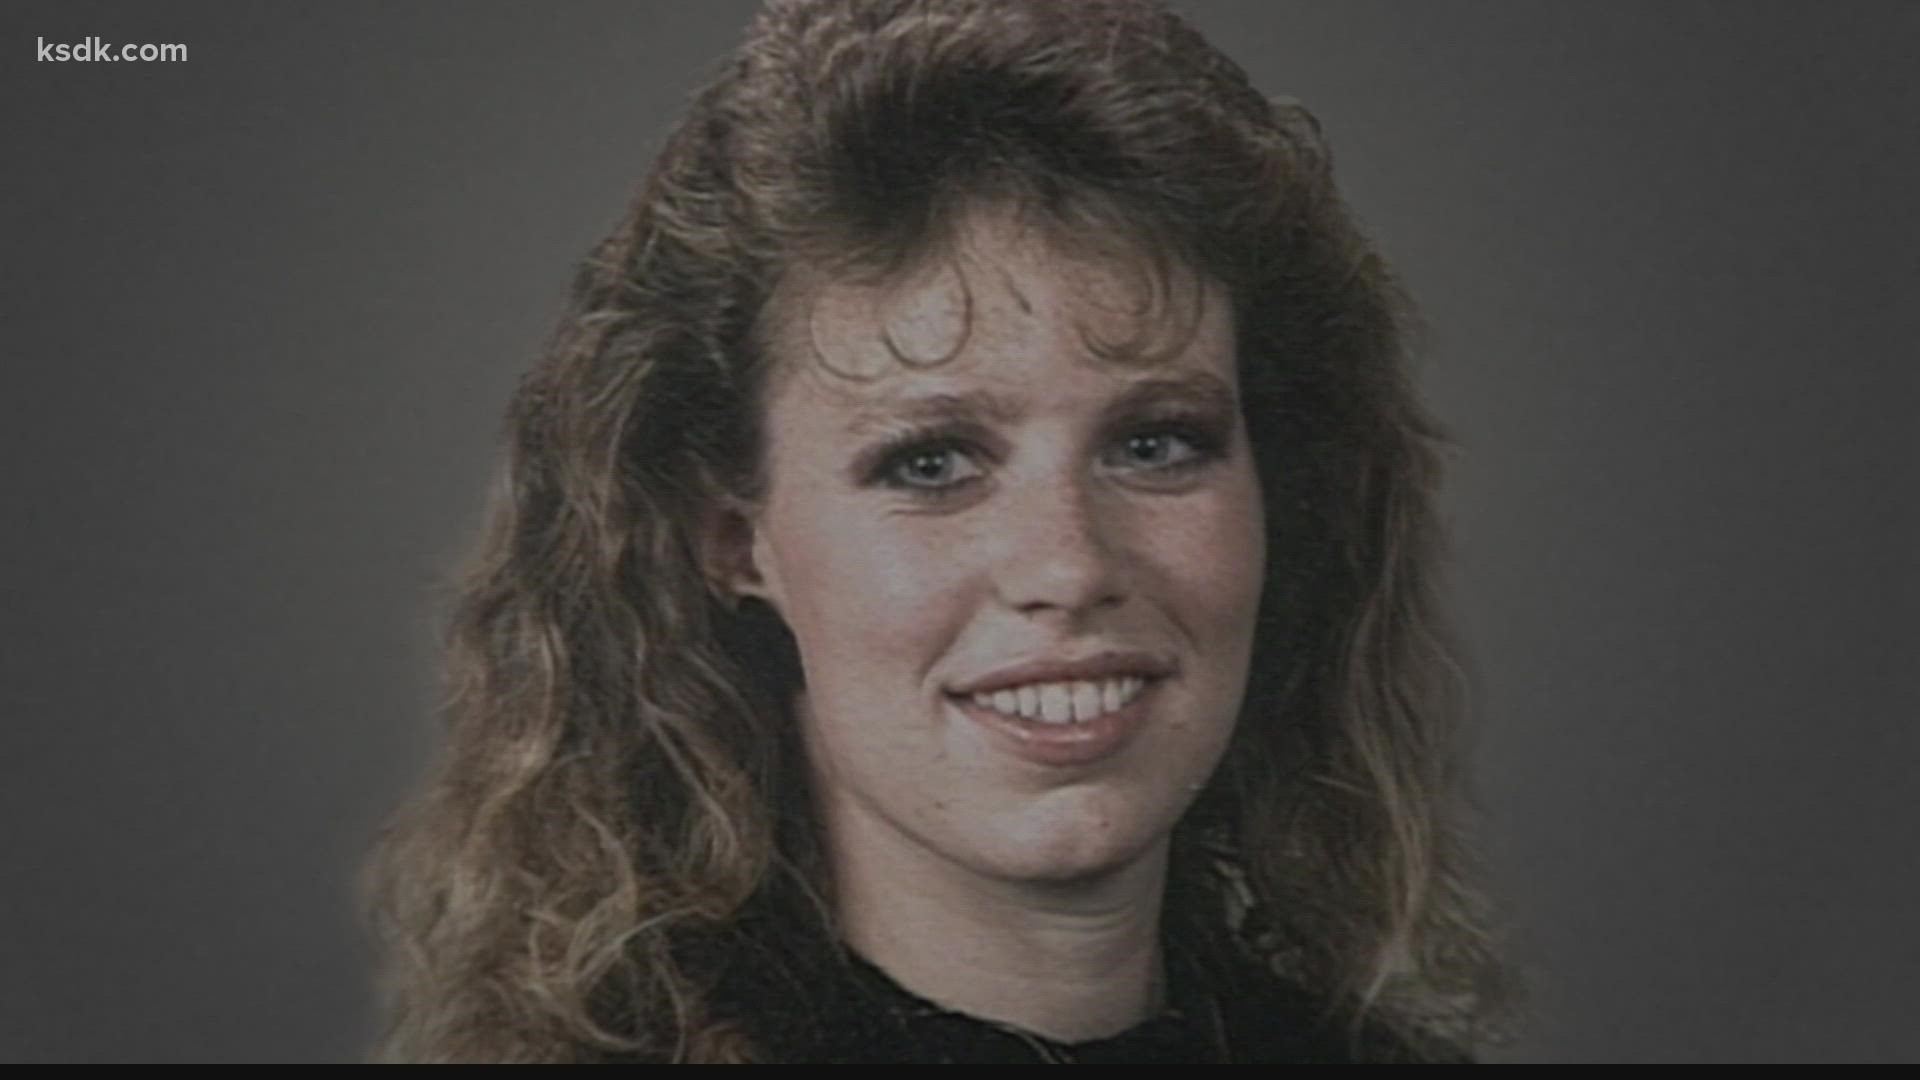 A new detective is assigned to work the unsolved 1992 murder of Nancy Kitzmiller, which was linked to five other killings across three states